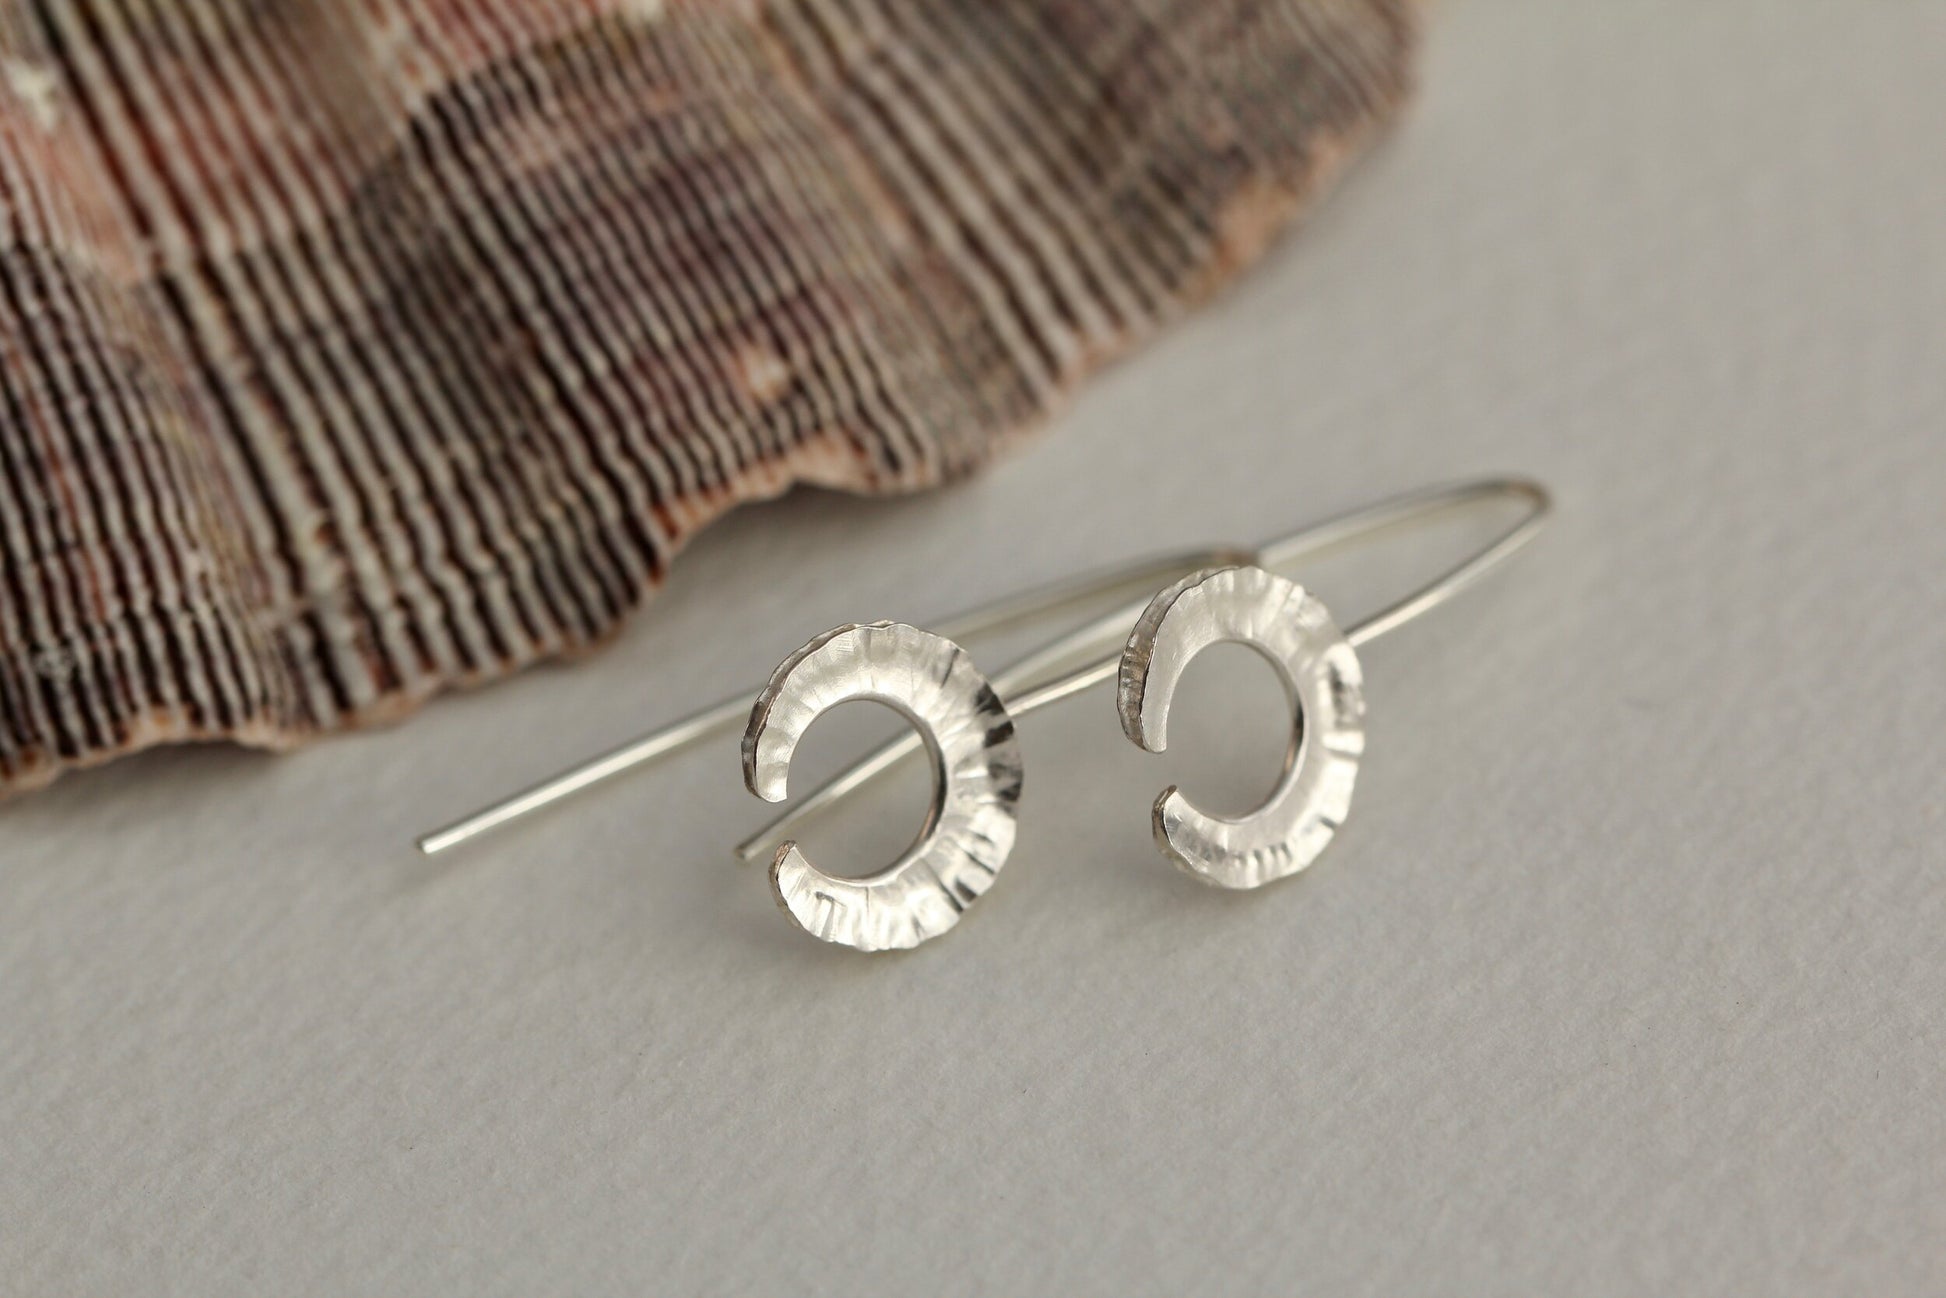 Gail Wire Earrings - Sterling Silver - The Bristol Artisan Handmade Sustainable Gifts and Homewares.